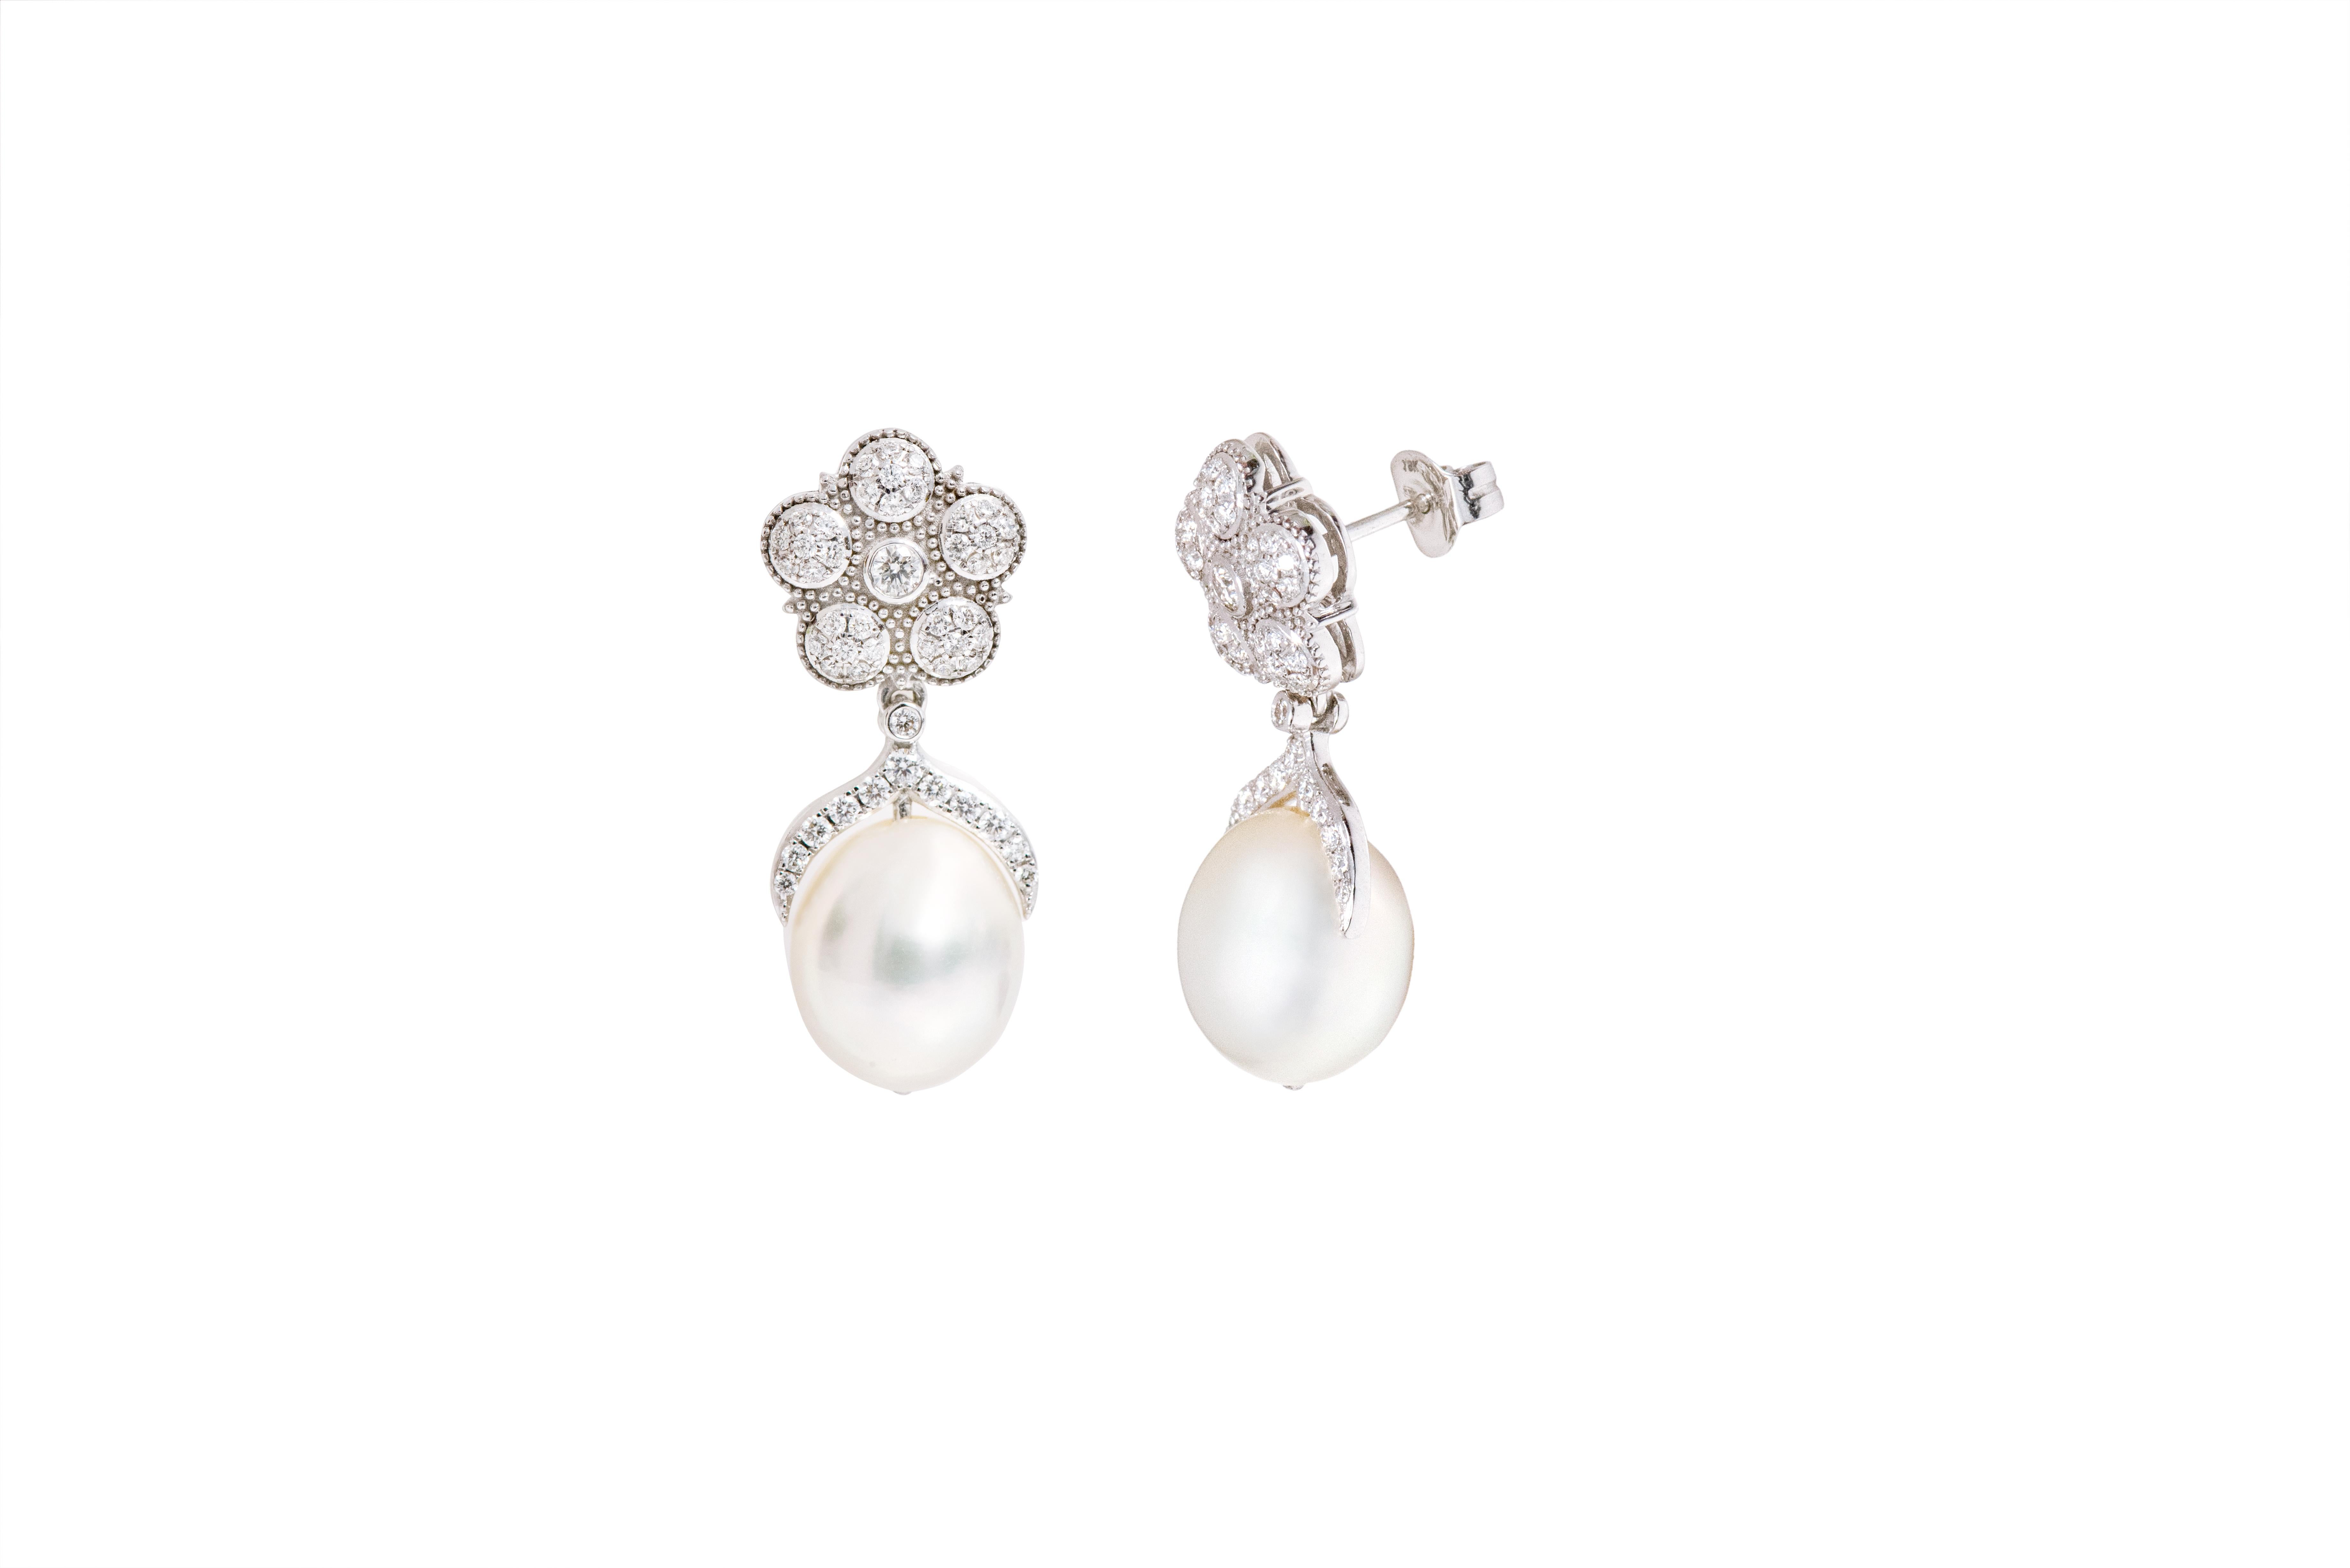 18 Karat White Gold Natural South Sea Pearl and Diamond Drop Earrings 

This immaculate uncanny ovalish-round pearl drop with the elegant pentagonal diamond stud top is a magnificent elevated design pair. The diamond stud with the solitaire round